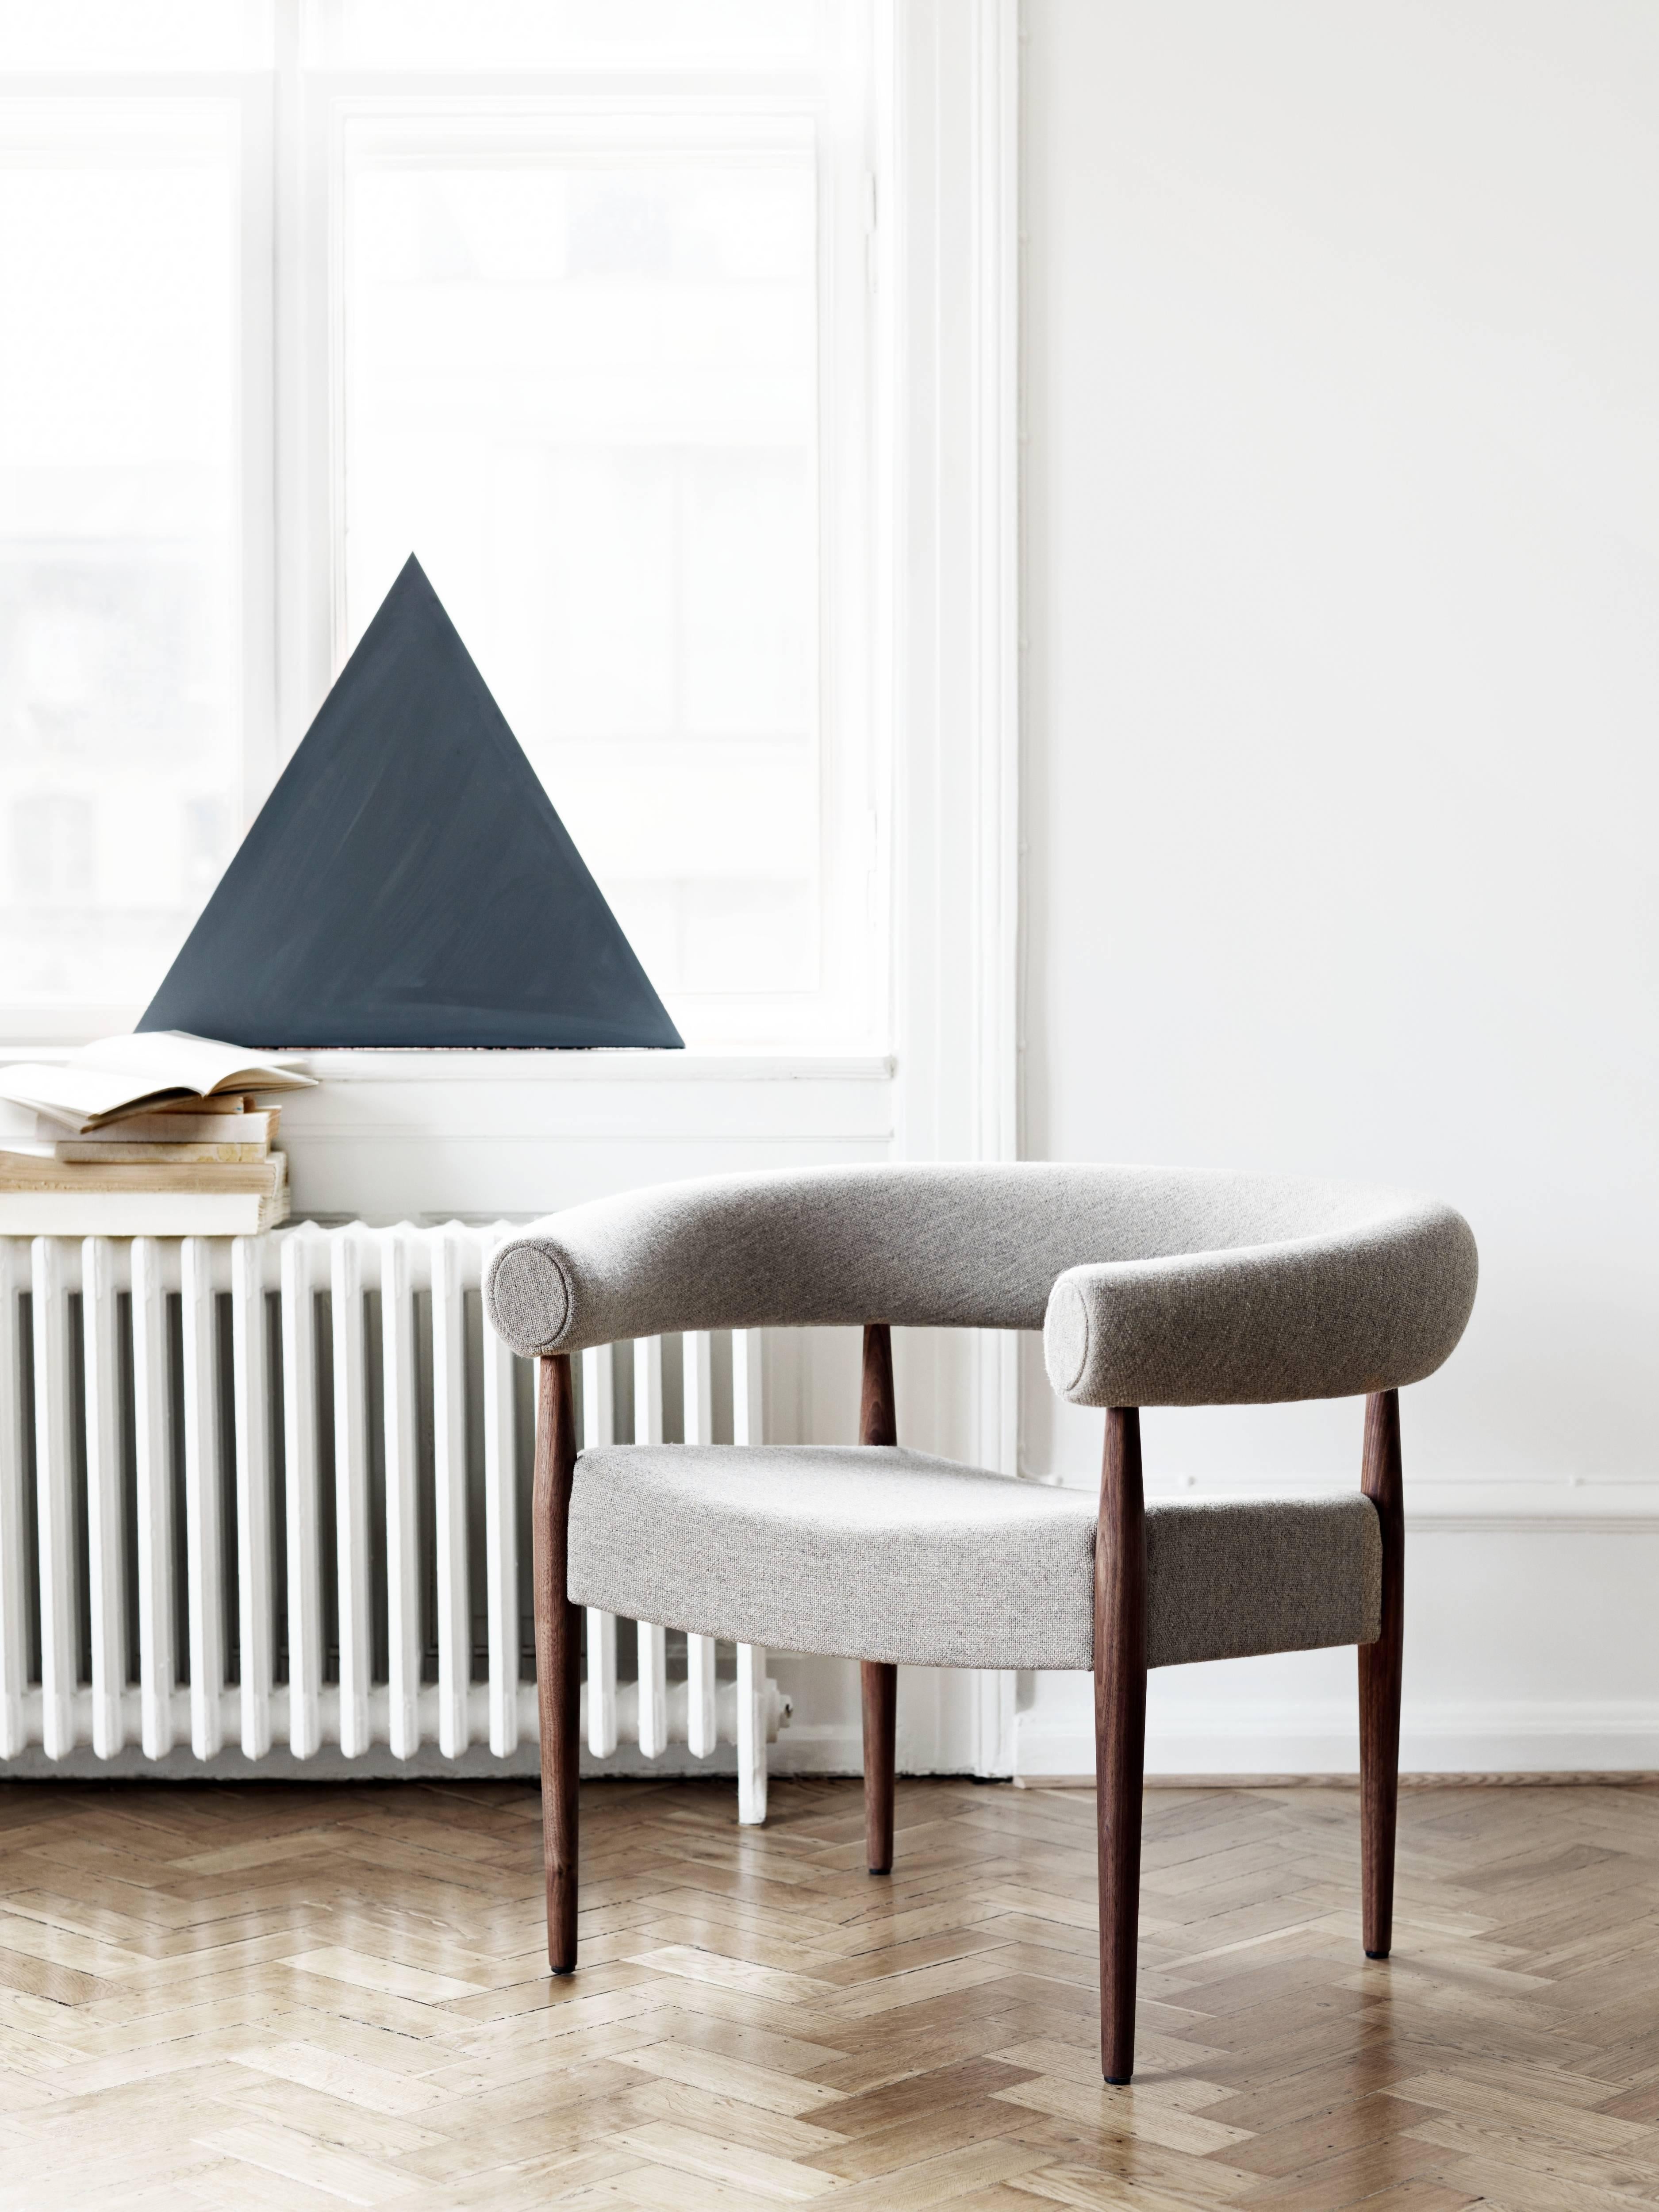 New production of Nanna and Jorgen Ditzel's ring chair manufactured by GETAMA. GETAMA had a long relationship with Nanna Ditzel, often called the "Queen" of Danish Design and Hans Wegner was also an in-house for GETAMA for a number of